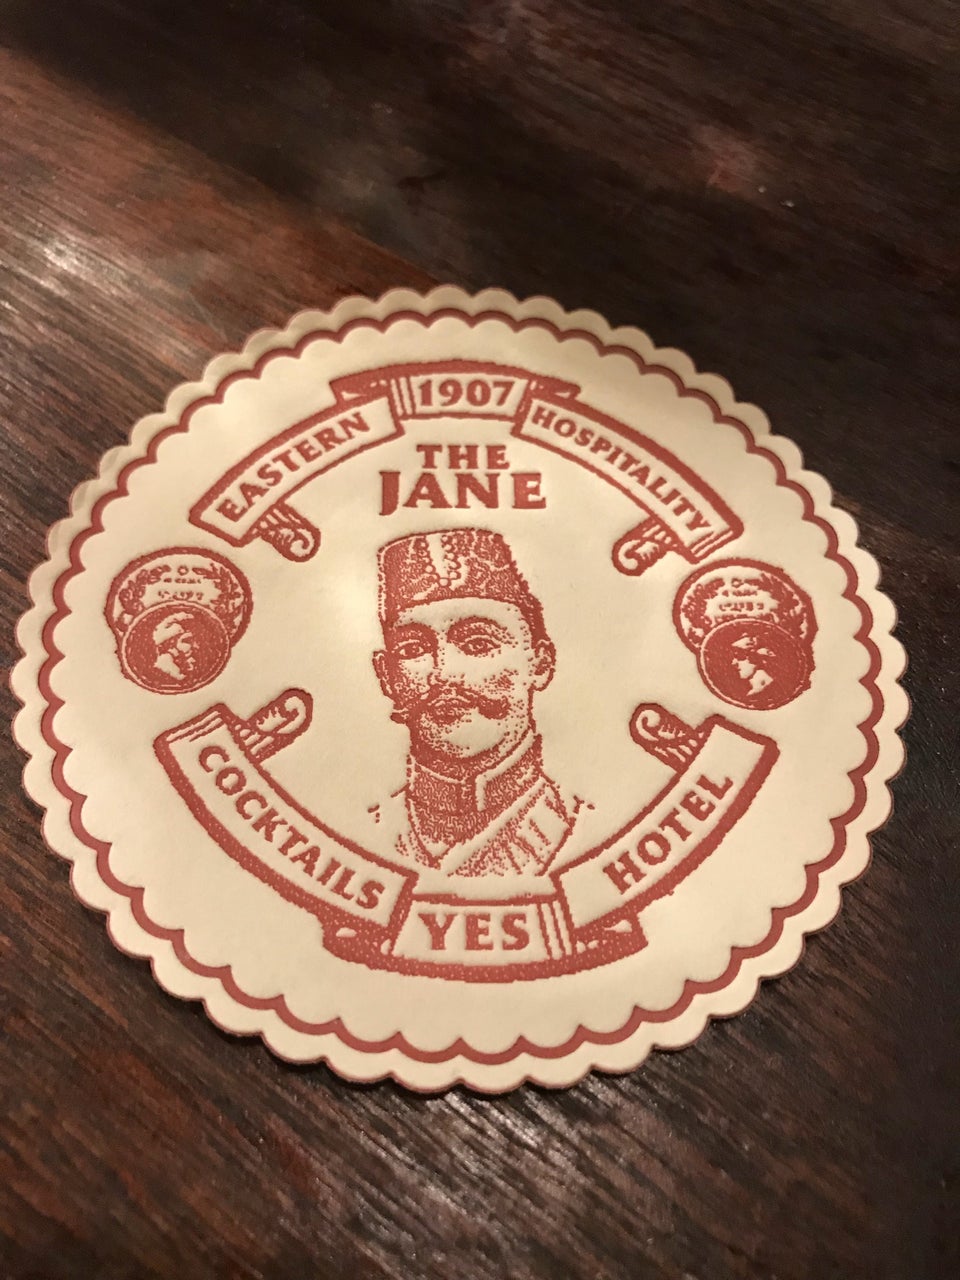 Photo of The Jane Hotel